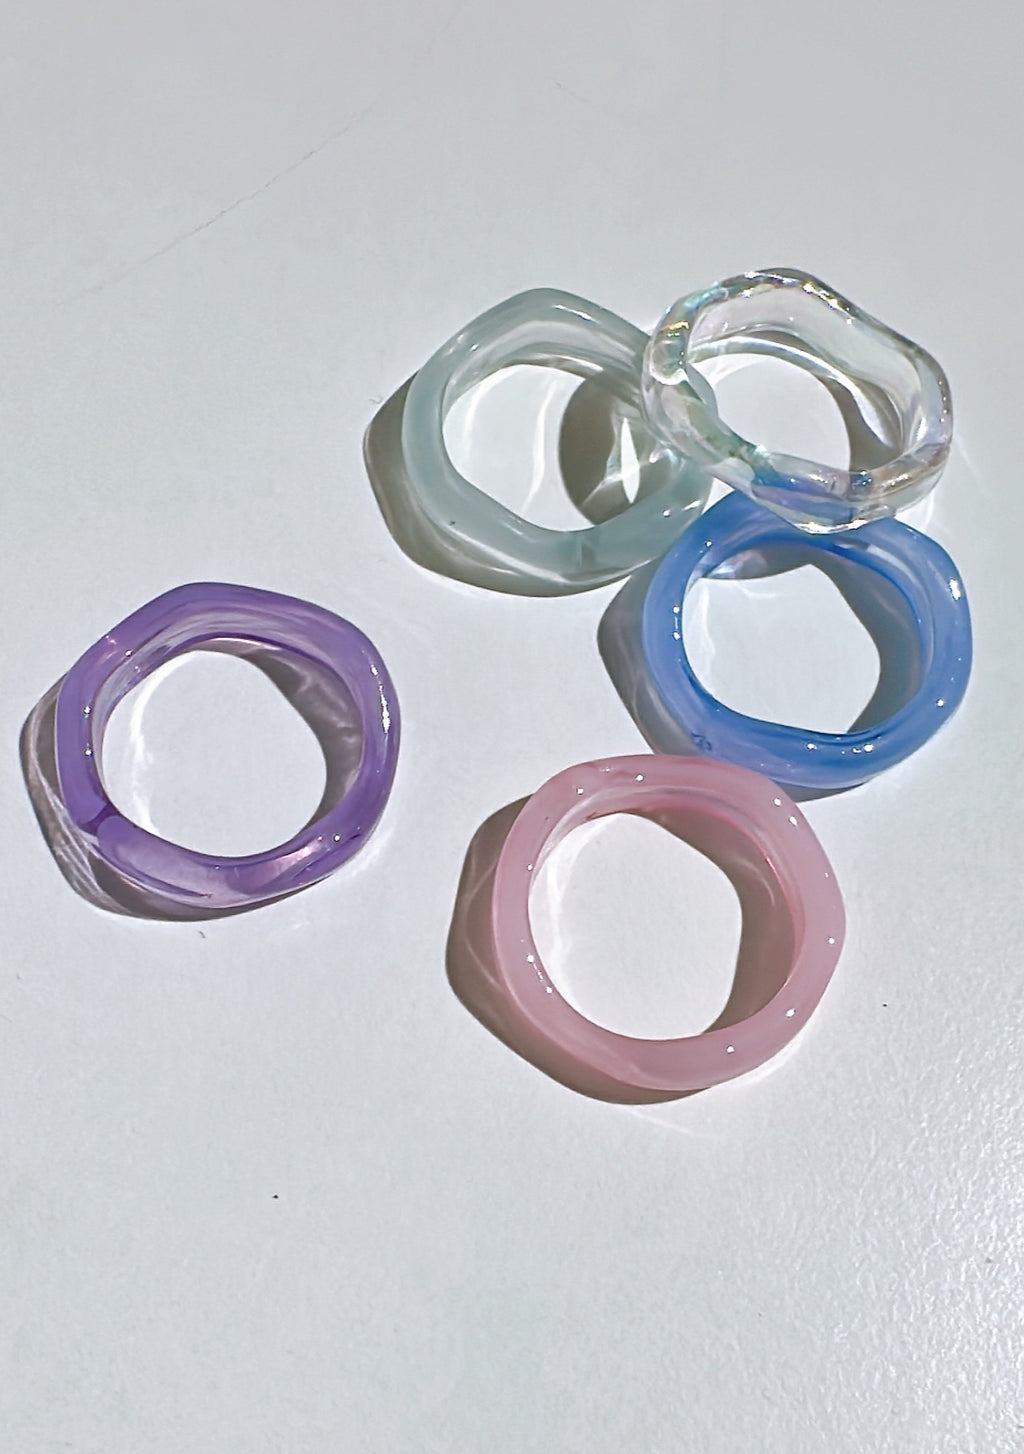 Clear Orora Ring